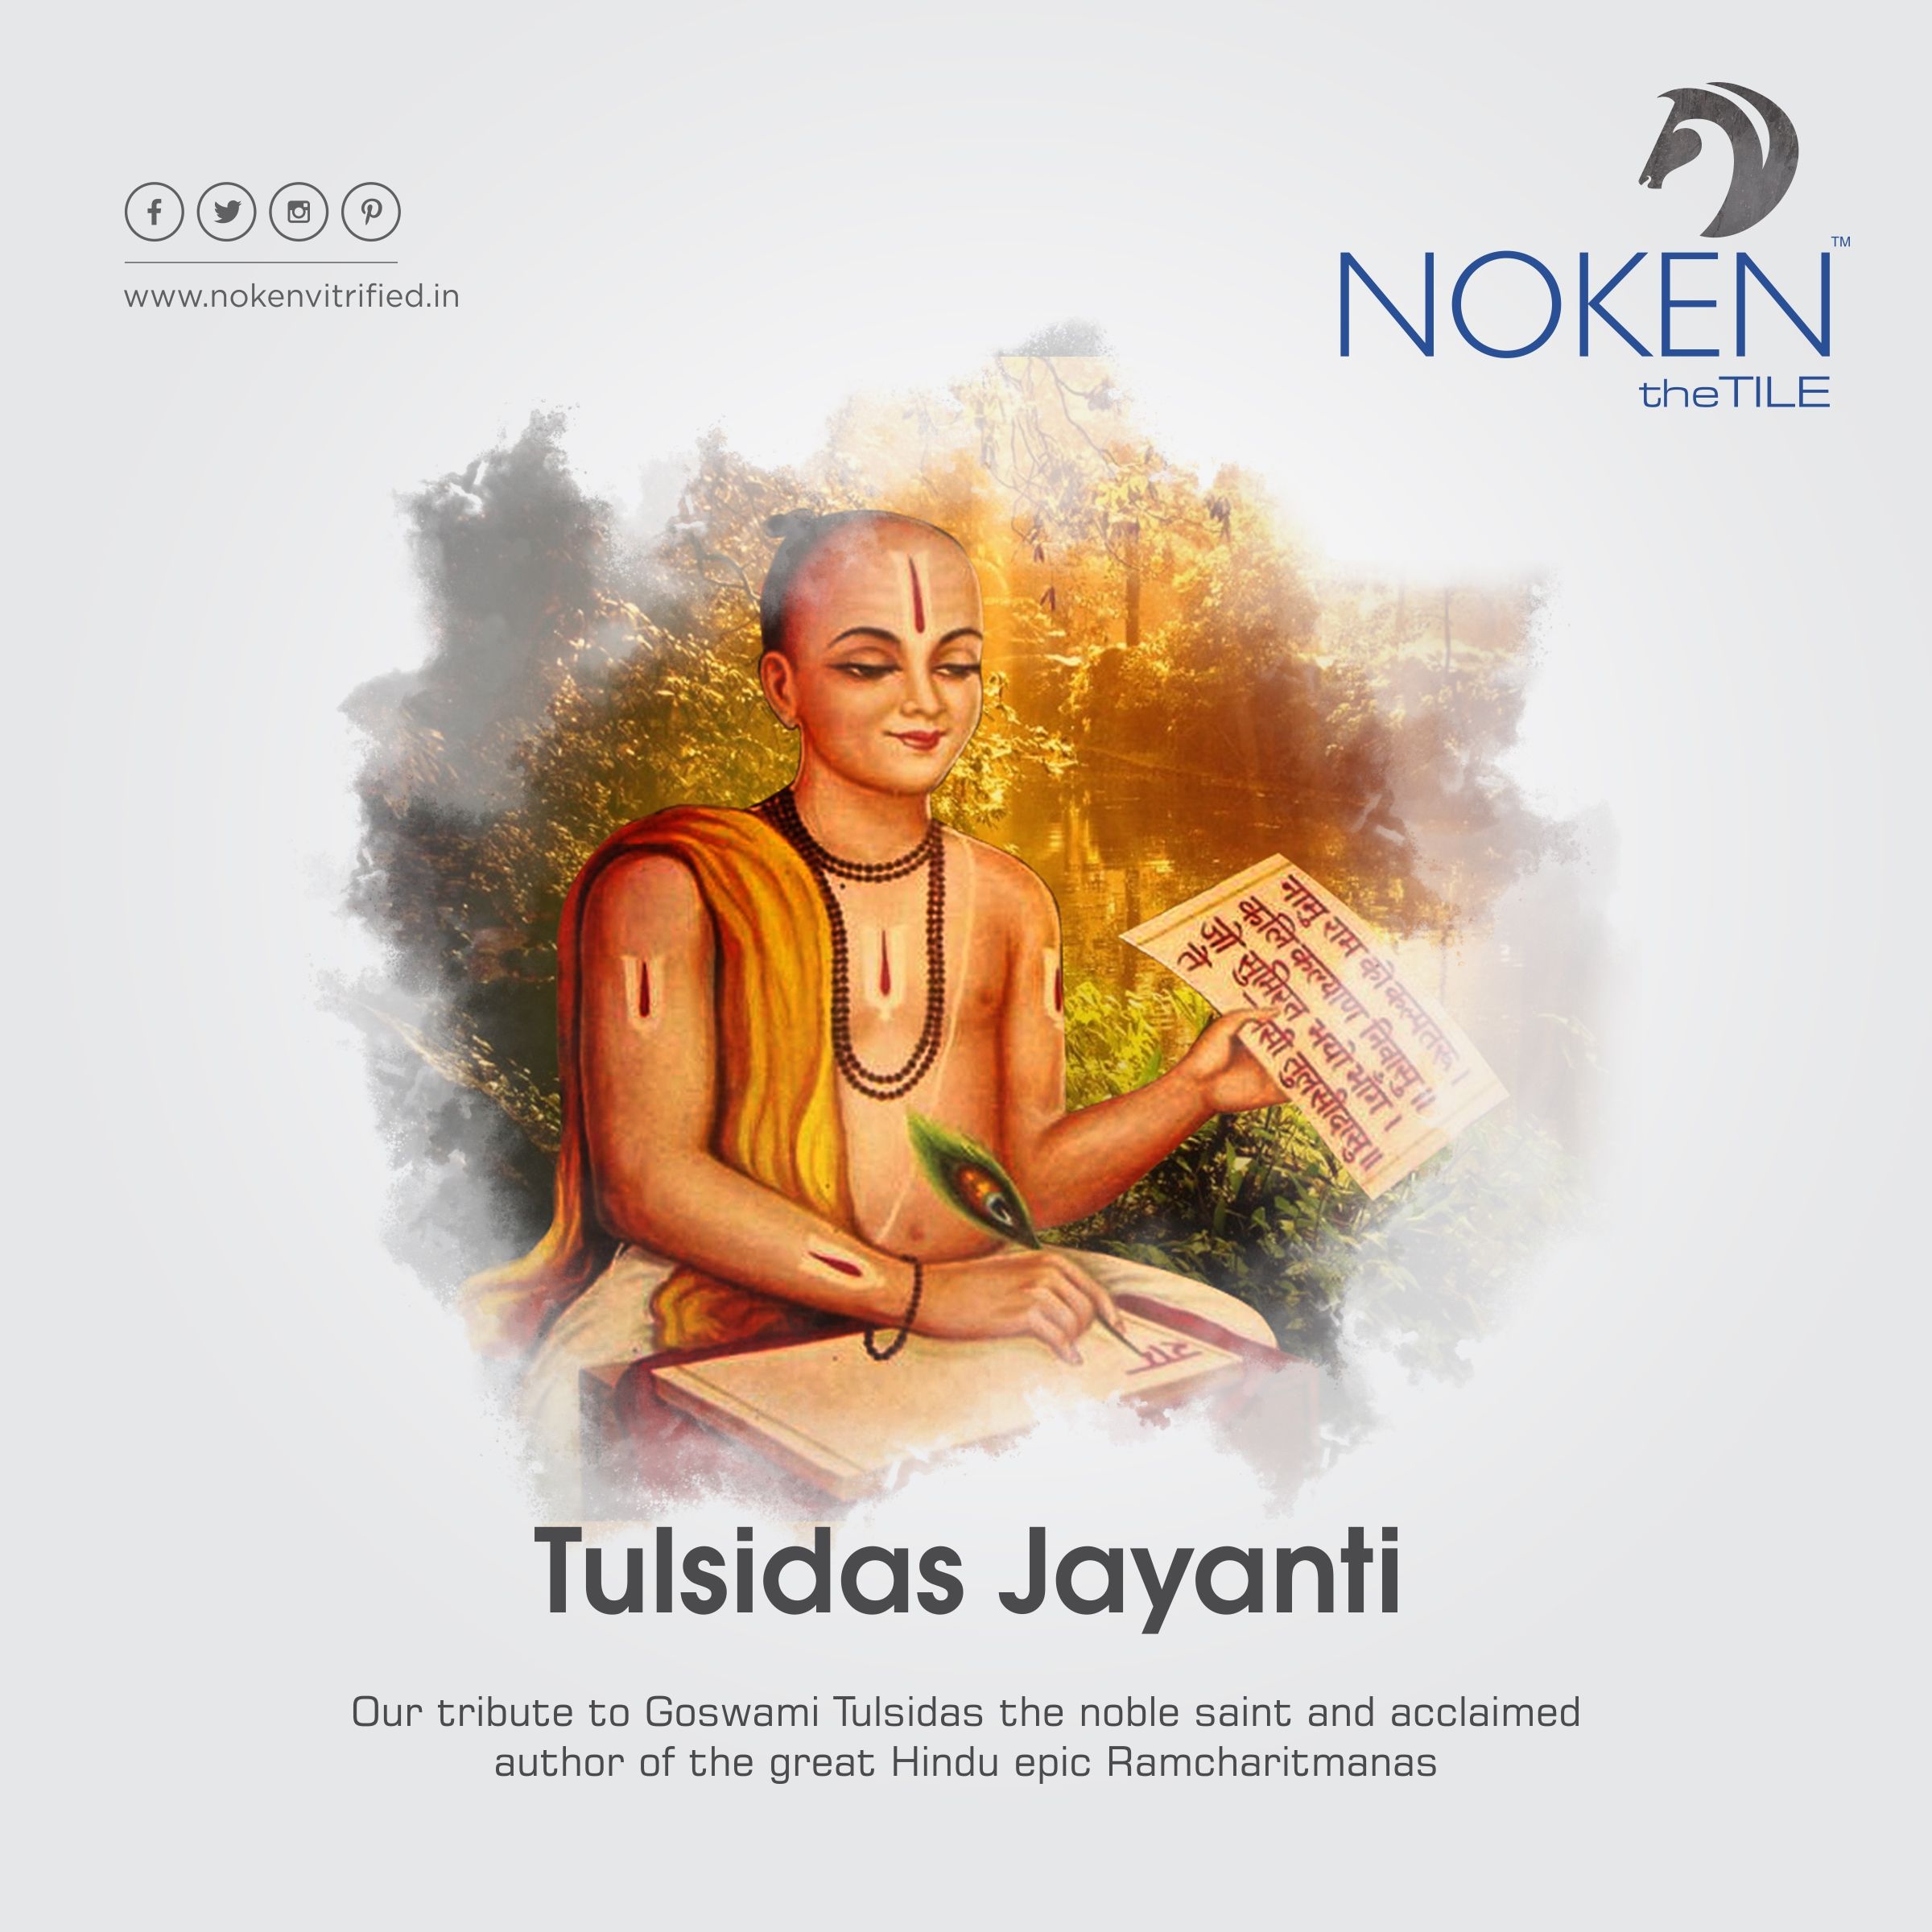 Our Tribute To Goswami Tulsidas The Noble Saint And Acclaimed